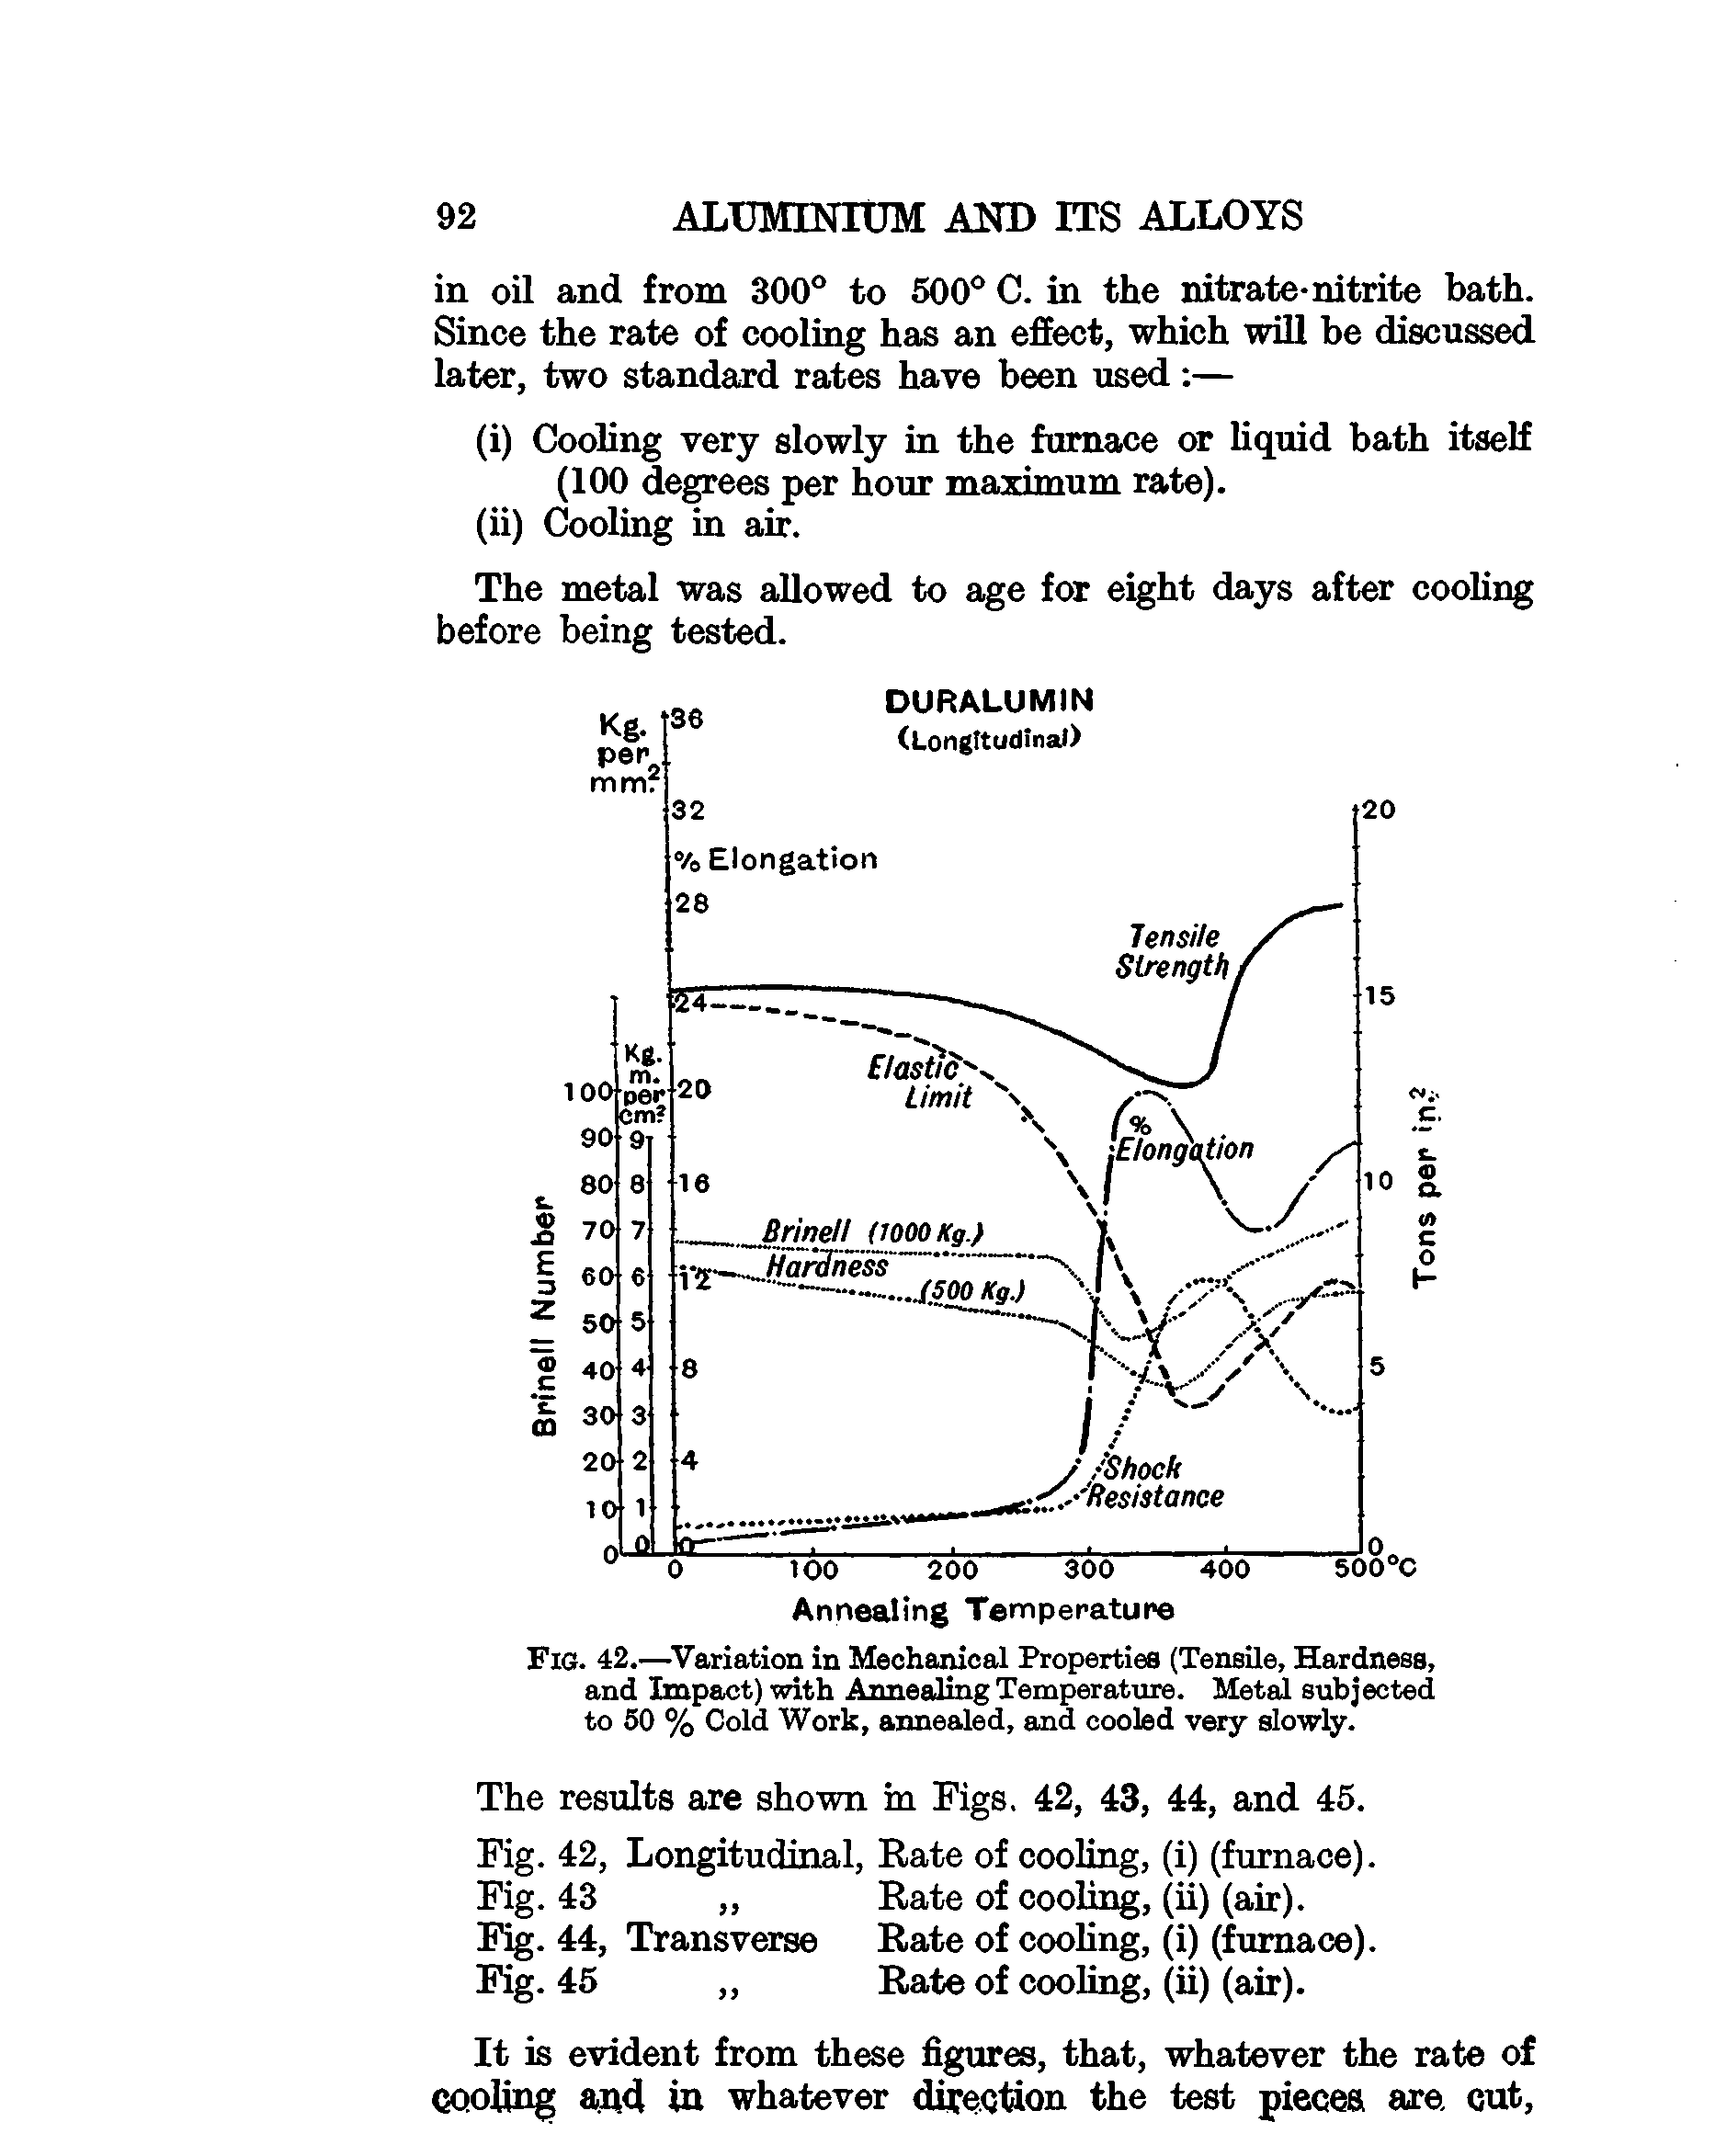 Fig. 42.—Variation in Mechanical Properties (Tensile, Hardness, and Impact) with Annealing Temperature. Metal subjected to 50 % Cold Work, annealed, and cooled very slowly.